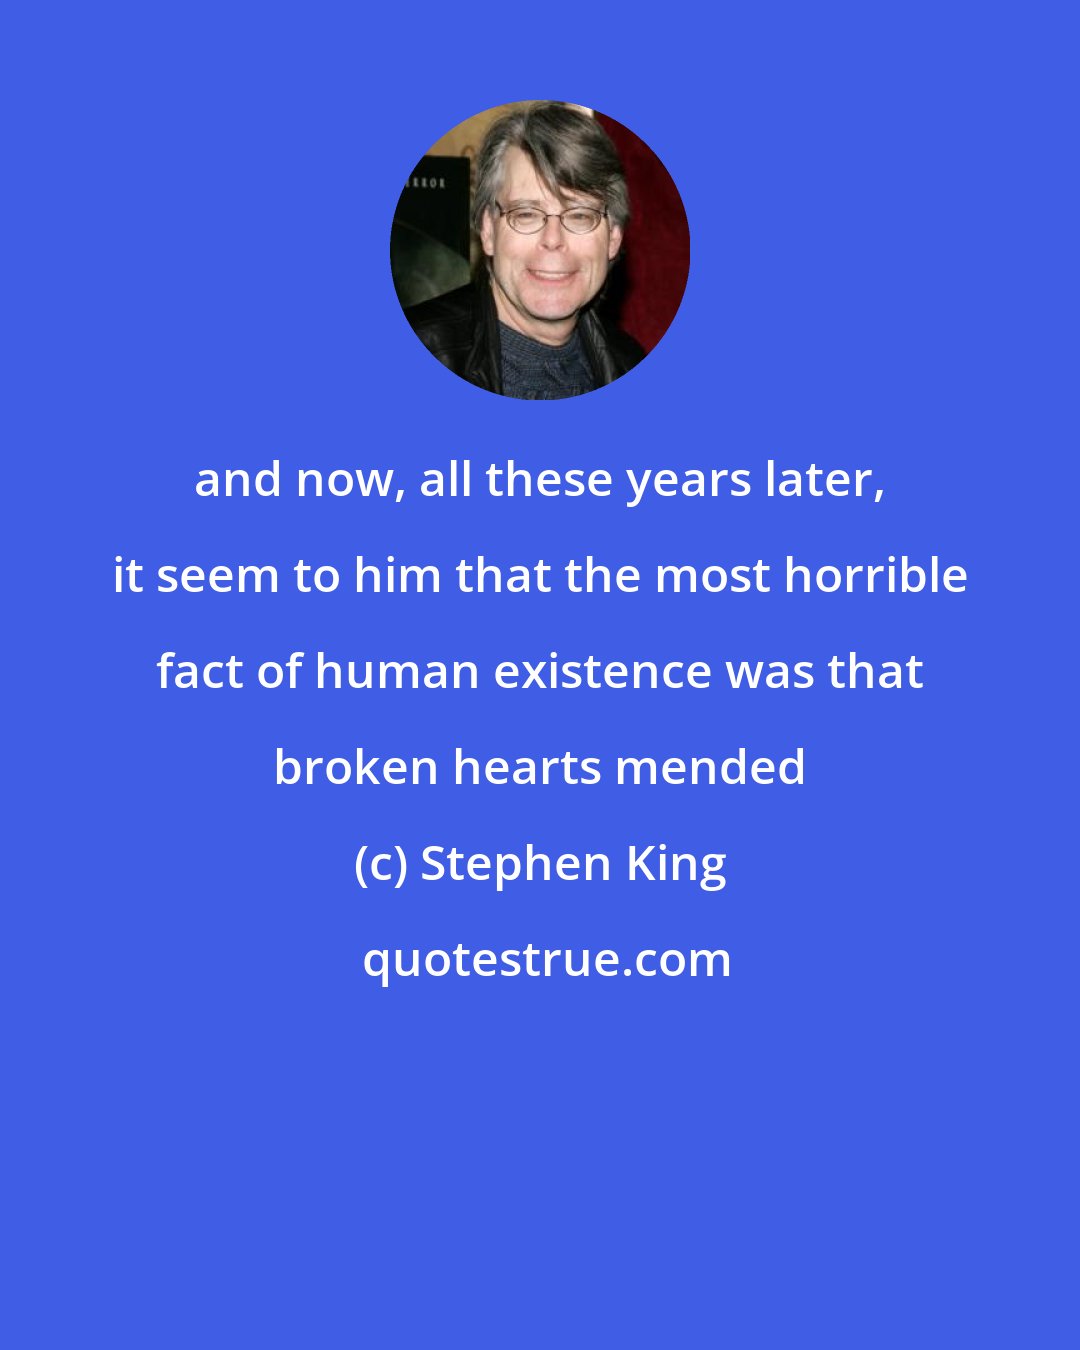 Stephen King: and now, all these years later, it seem to him that the most horrible fact of human existence was that broken hearts mended